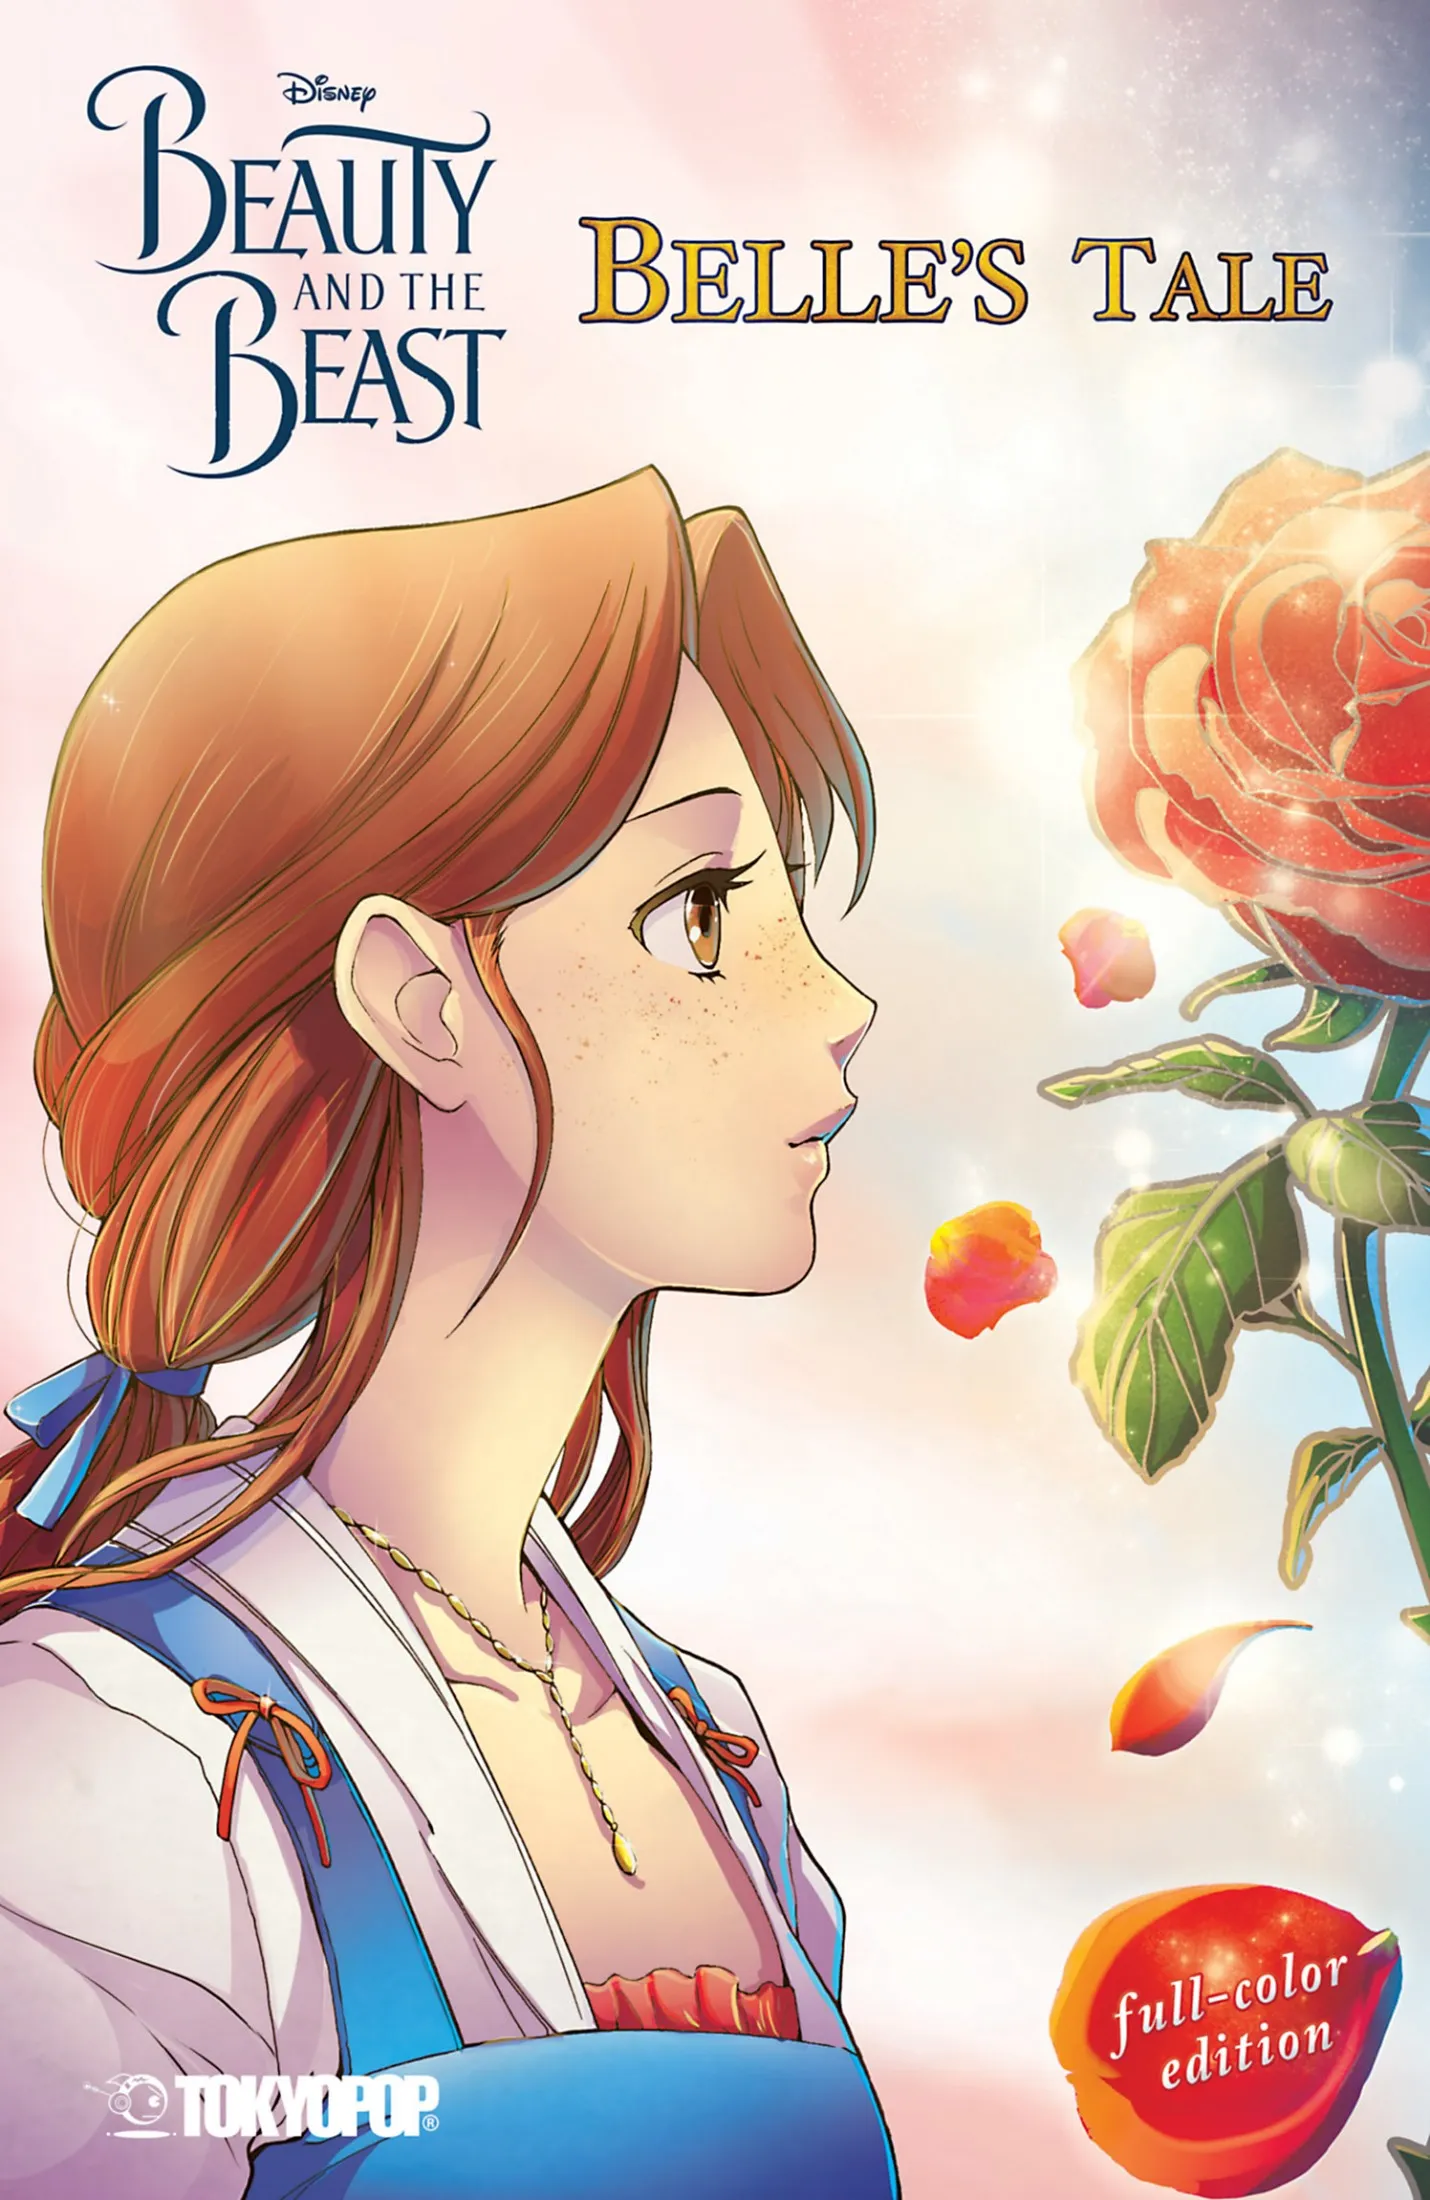 Belle's Tale (Full-Color Edition) (Disney Manga: Beauty and the Beast)